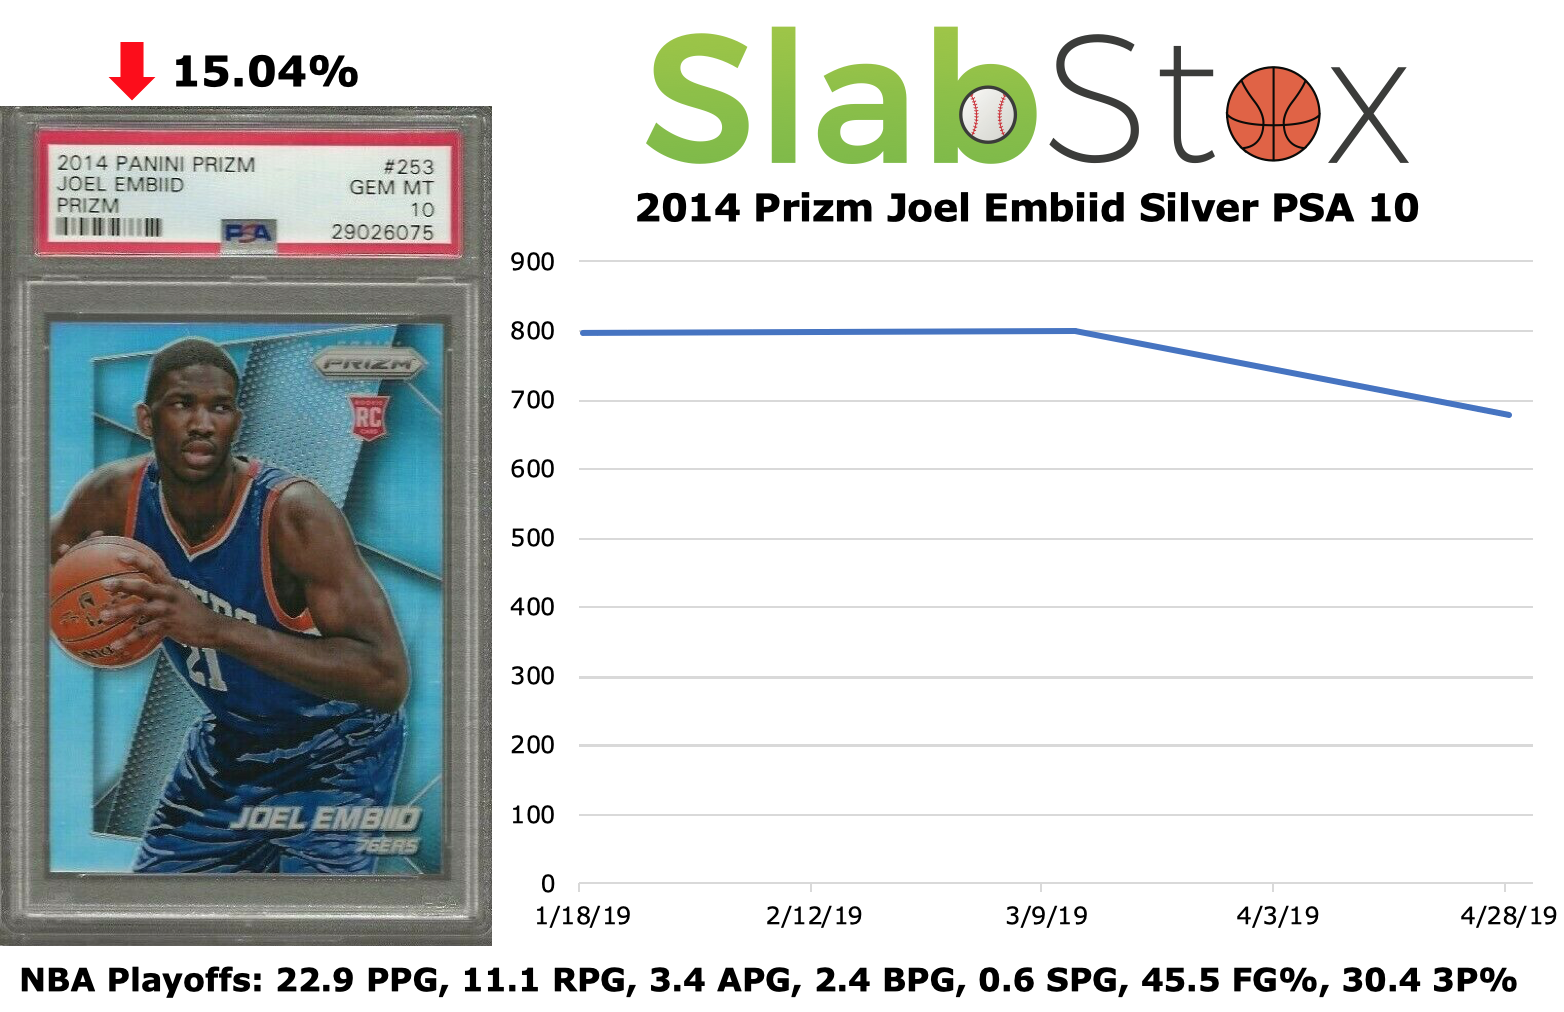 Graphic image of 2014 Prizm Joel Embiid Silver PSA 10 sports trading card by SlabStox